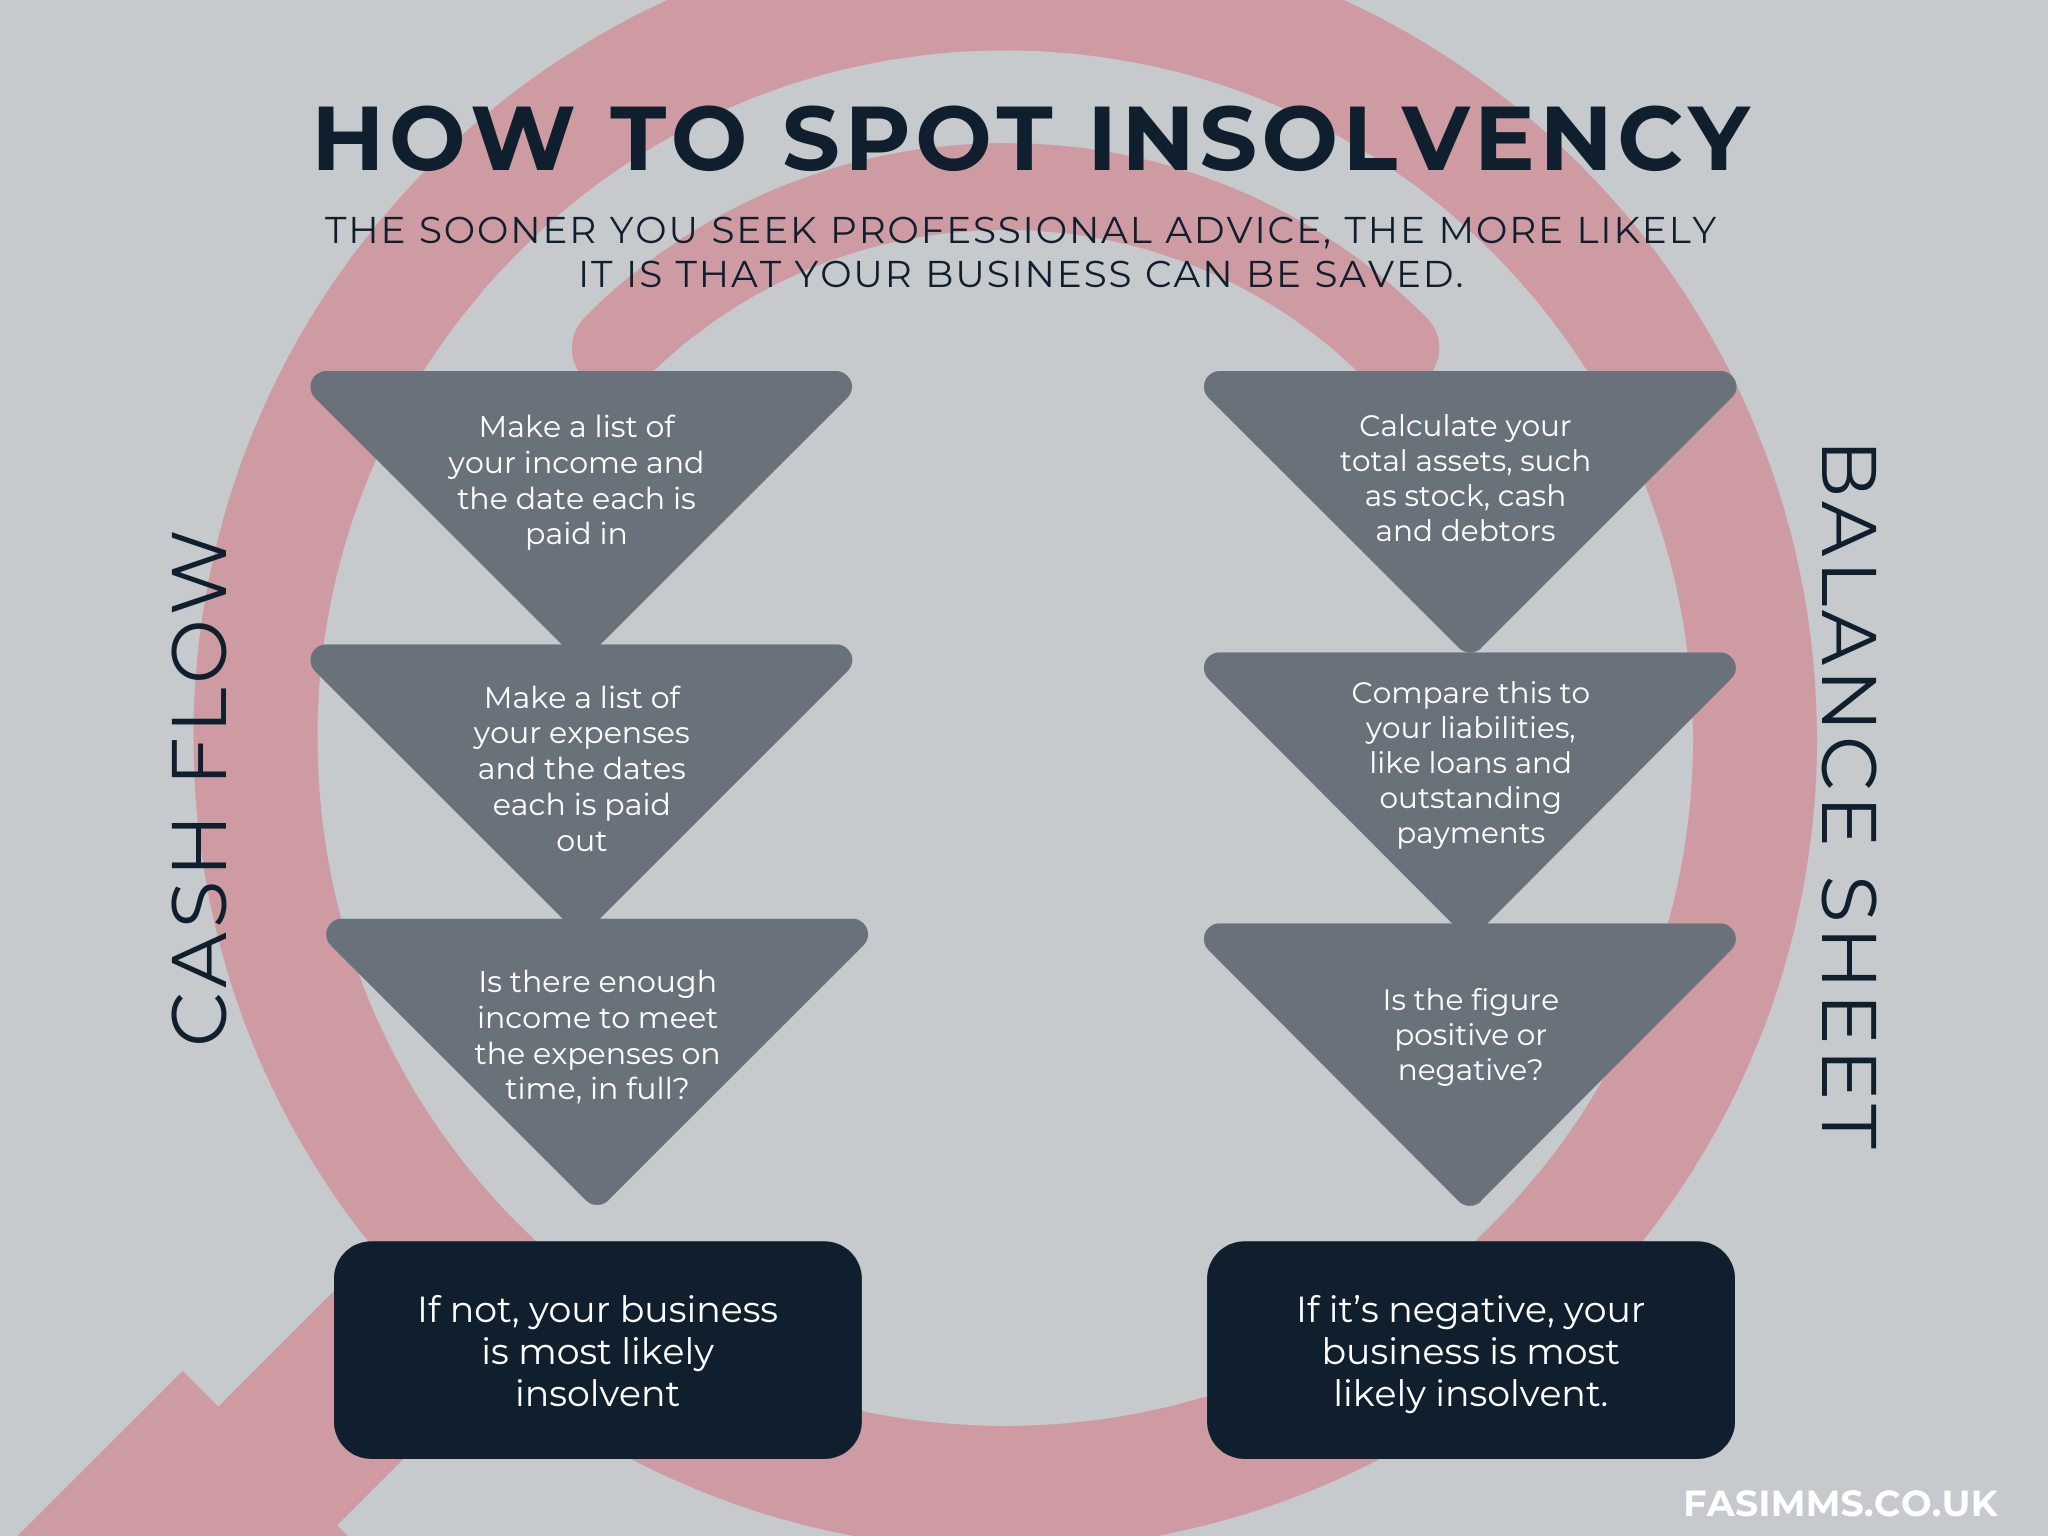 Signs your business may be insolvent